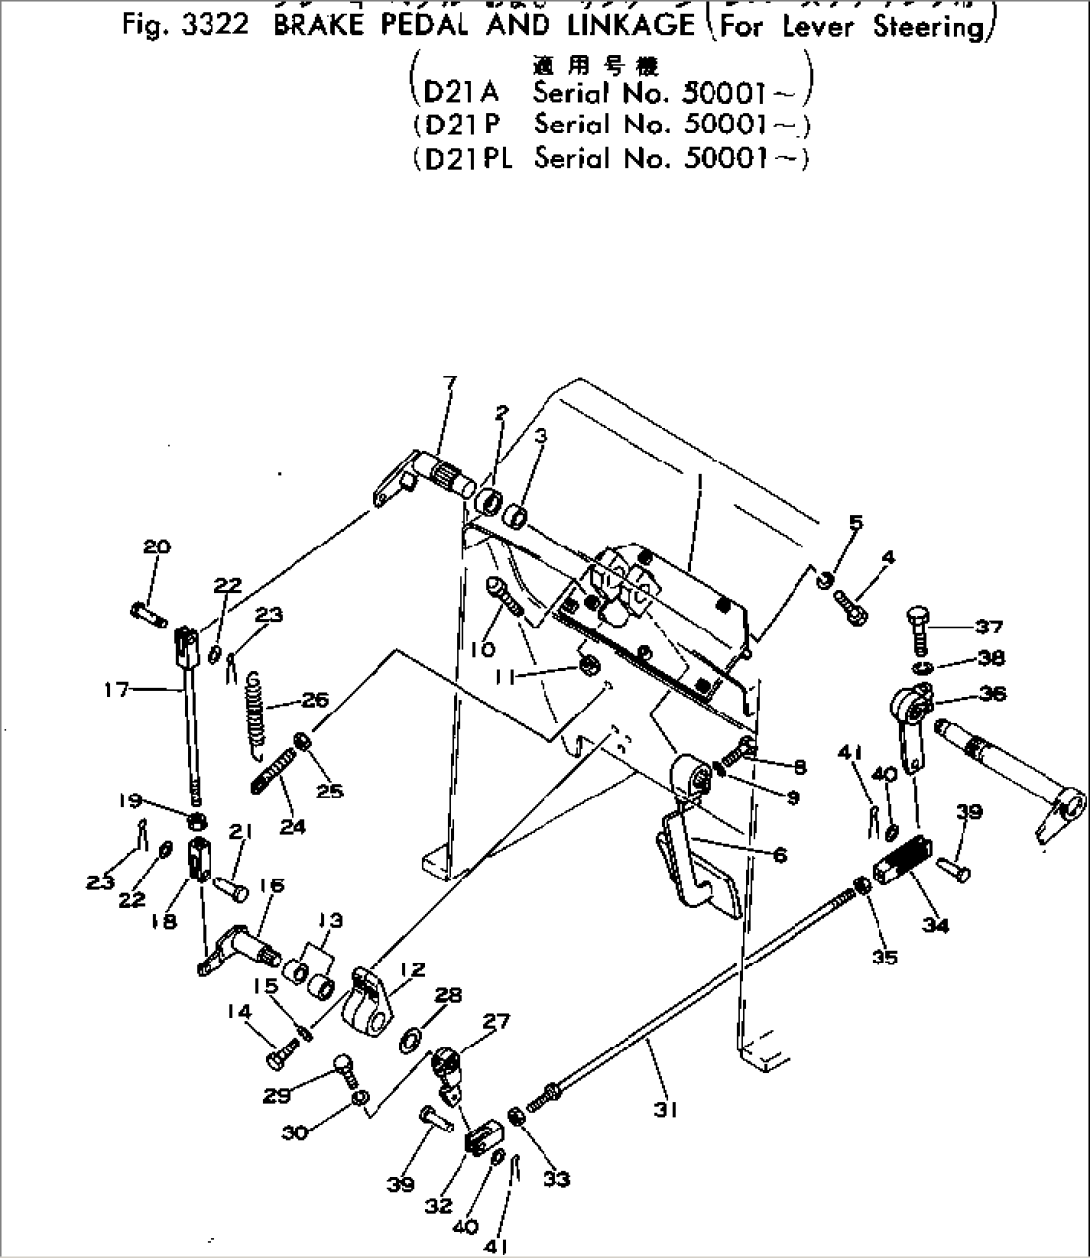 BRAKE PEDAL AND LINKAGE (FOR LEVER STEERING)